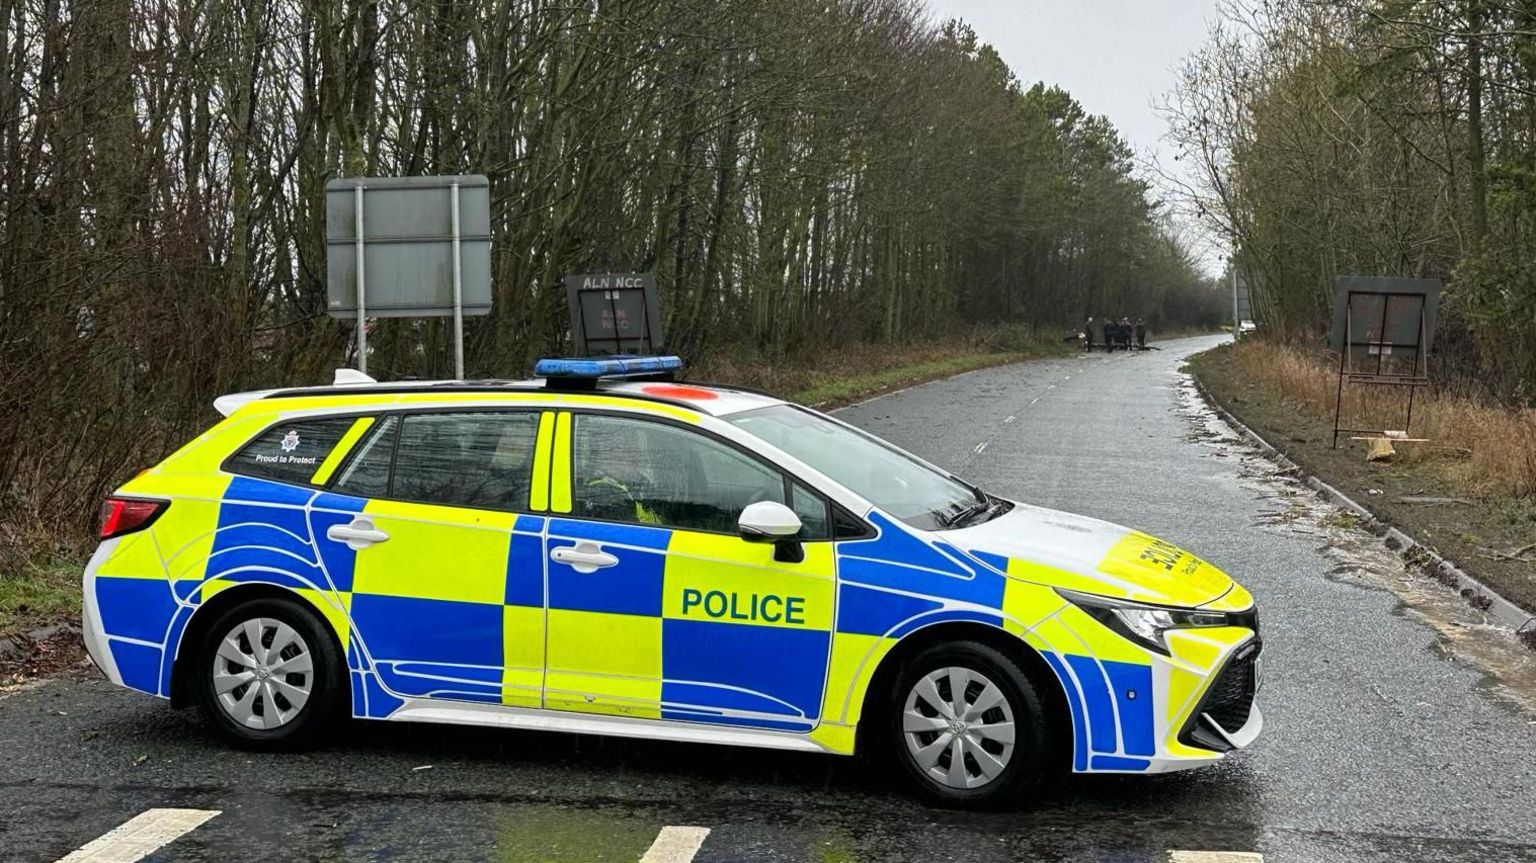 Police car on the A1068, where the incident happened